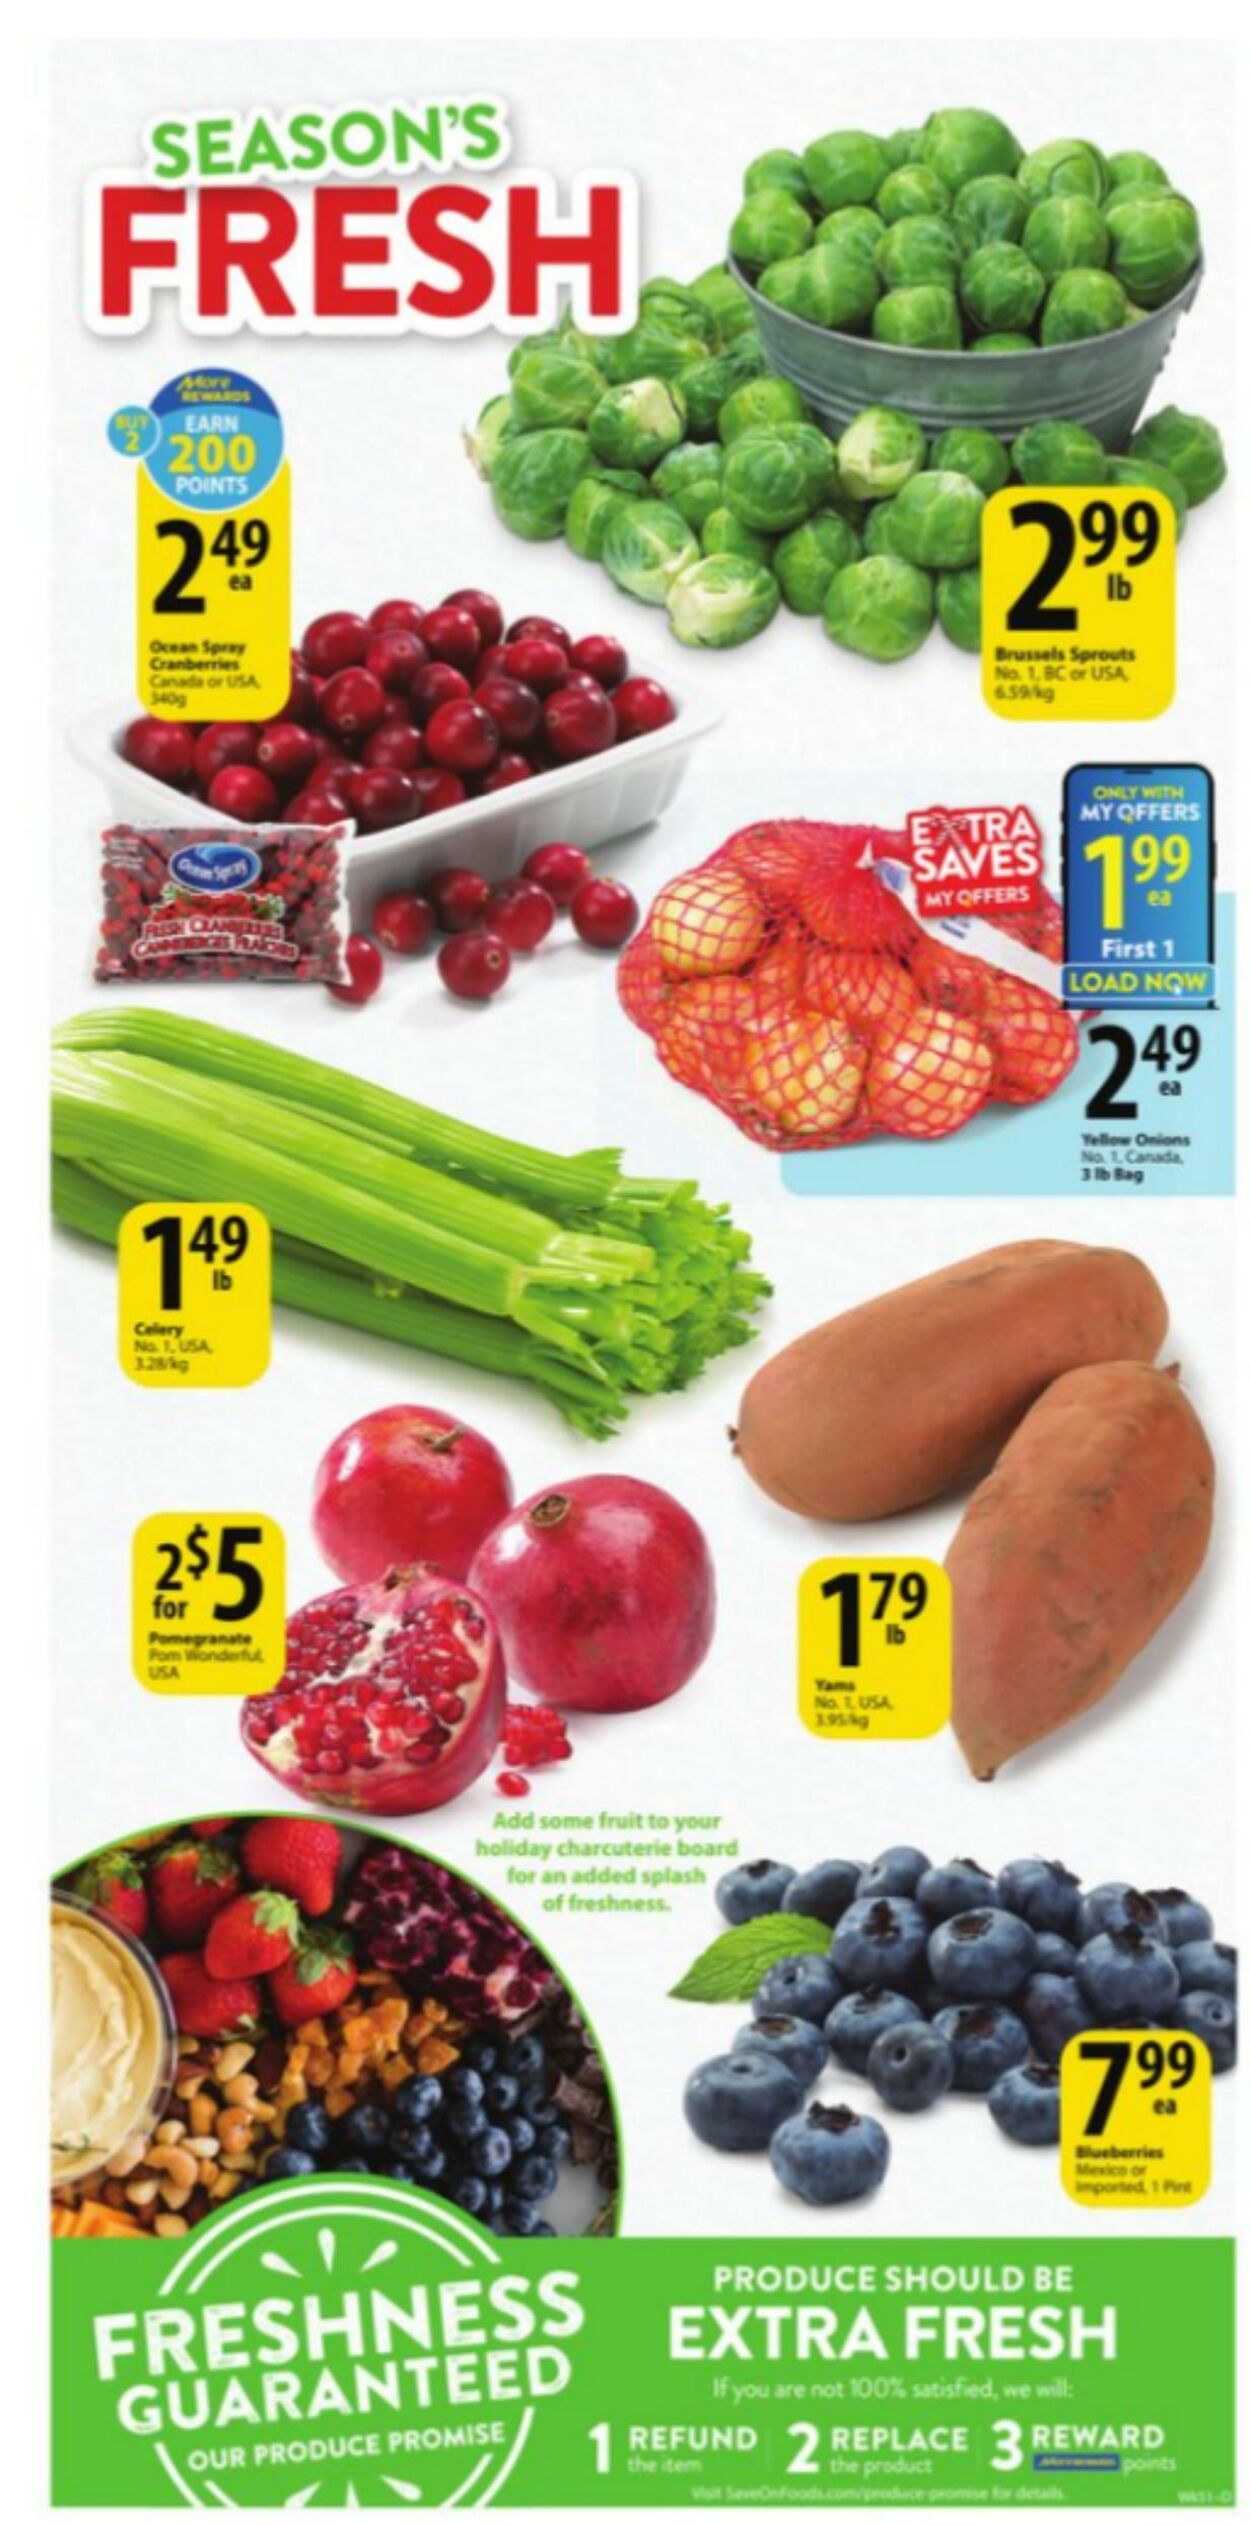 Flyer Save-On-Foods 21.12.2023 - 26.12.2023